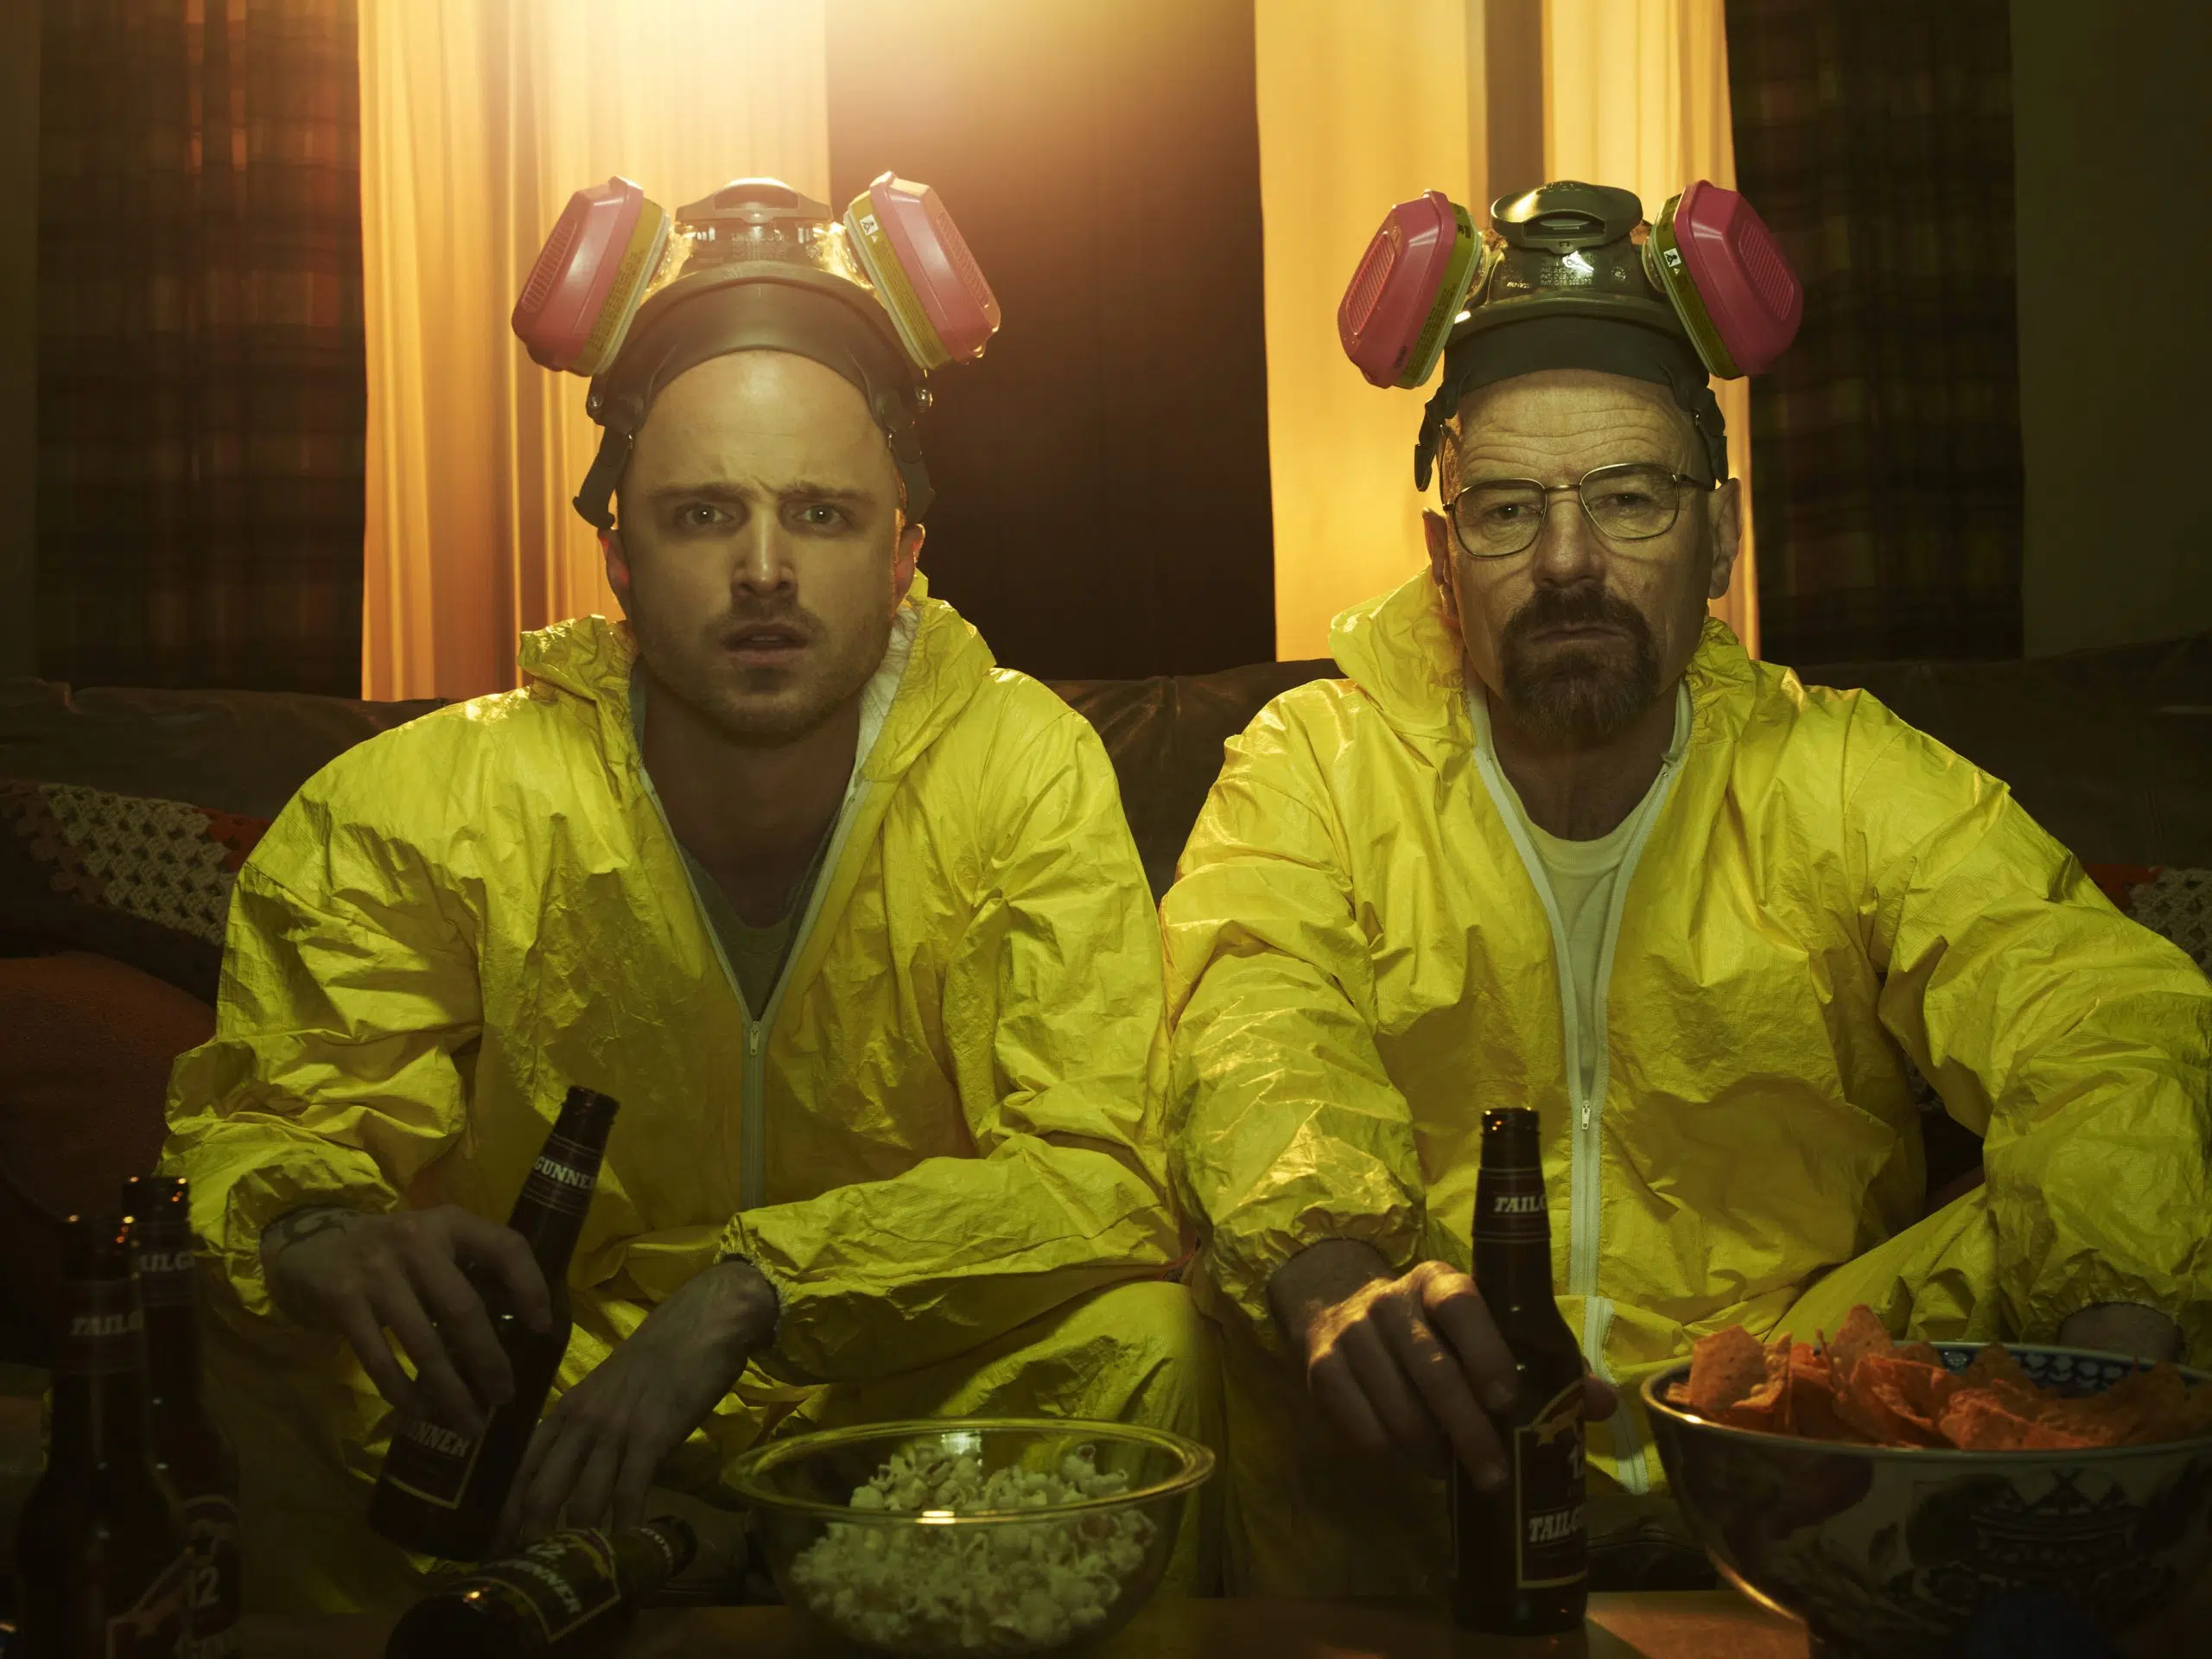 Aaron Paul and Bryan Cranston Will Reunite for a "Breaking Bad" Super Bowl Commercial